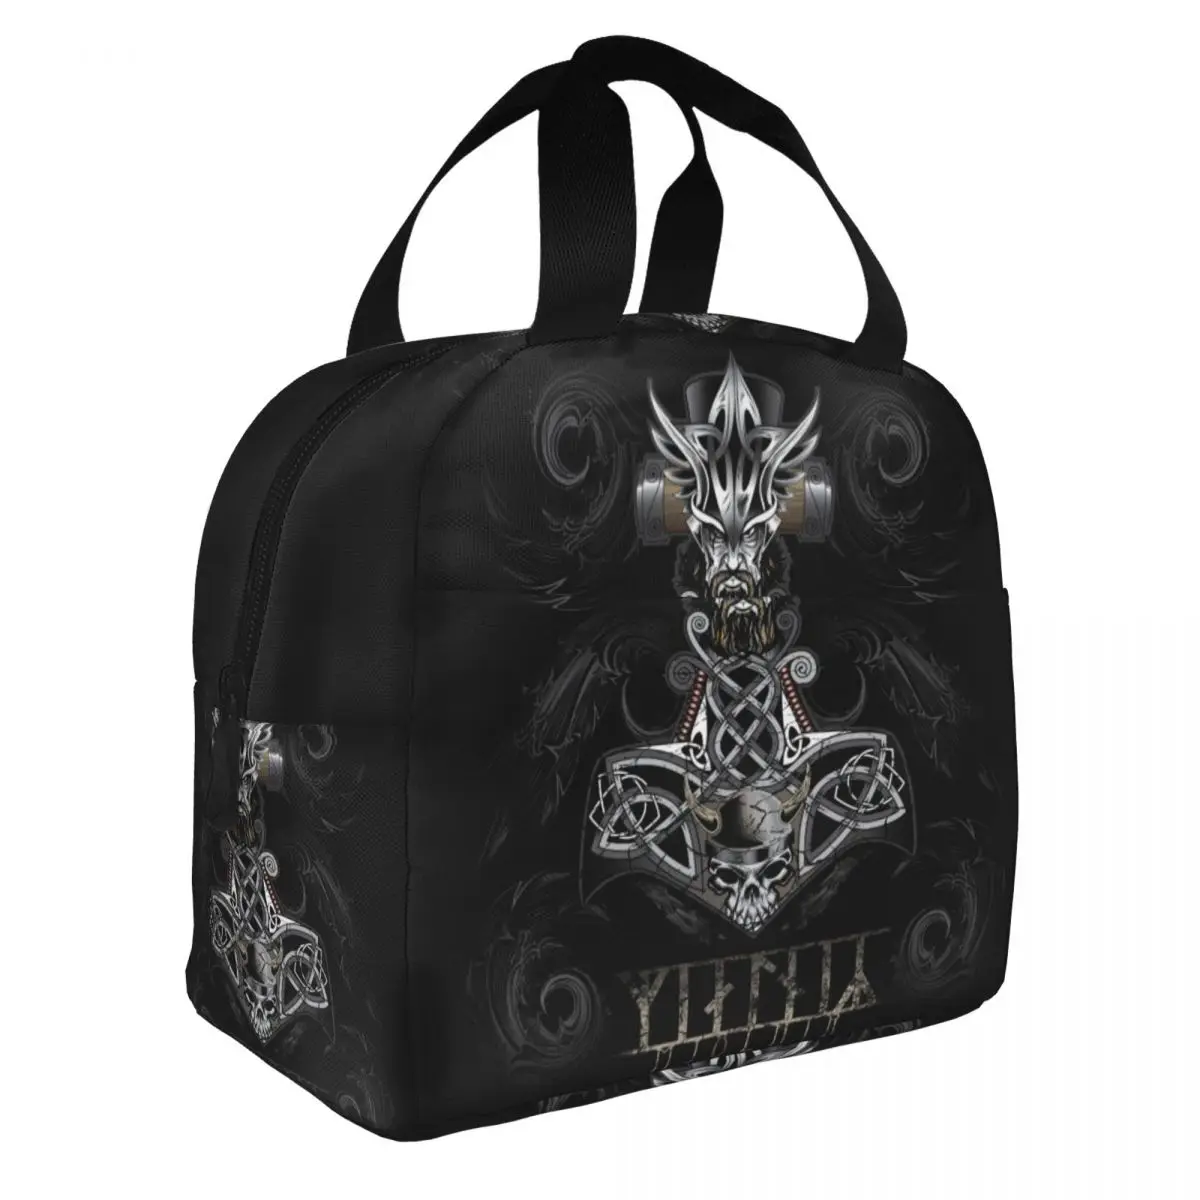 Runic Mjolnir Lunch Bento Bags Portable Aluminum Foil thickened Thermal Cloth Lunch Bag for Women Men Boy